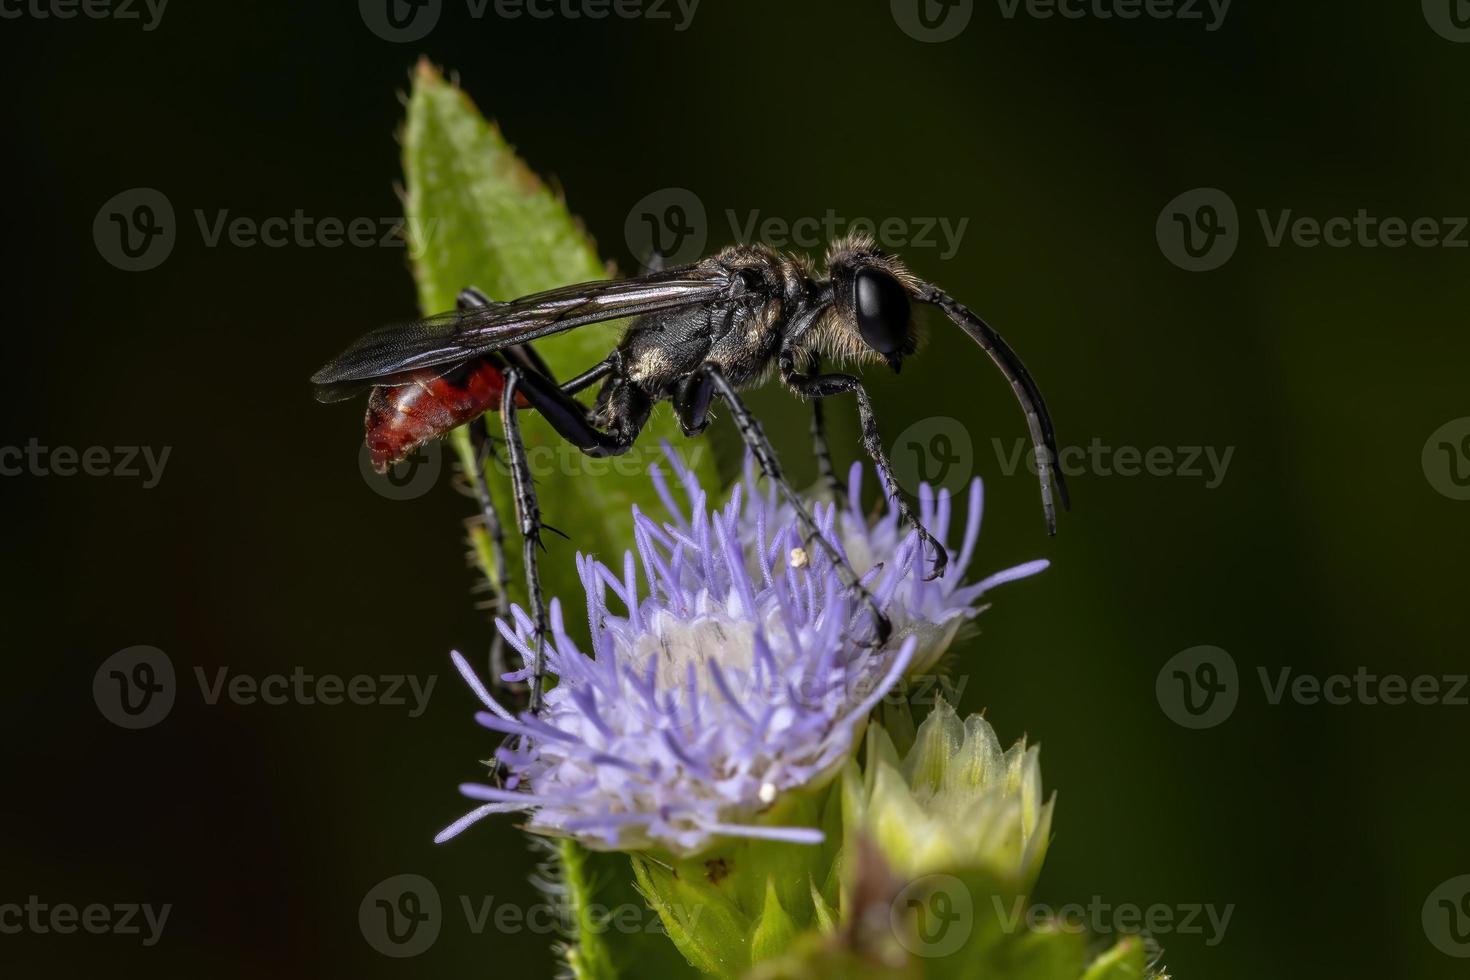 Male Adult Thread-waisted Wasp photo